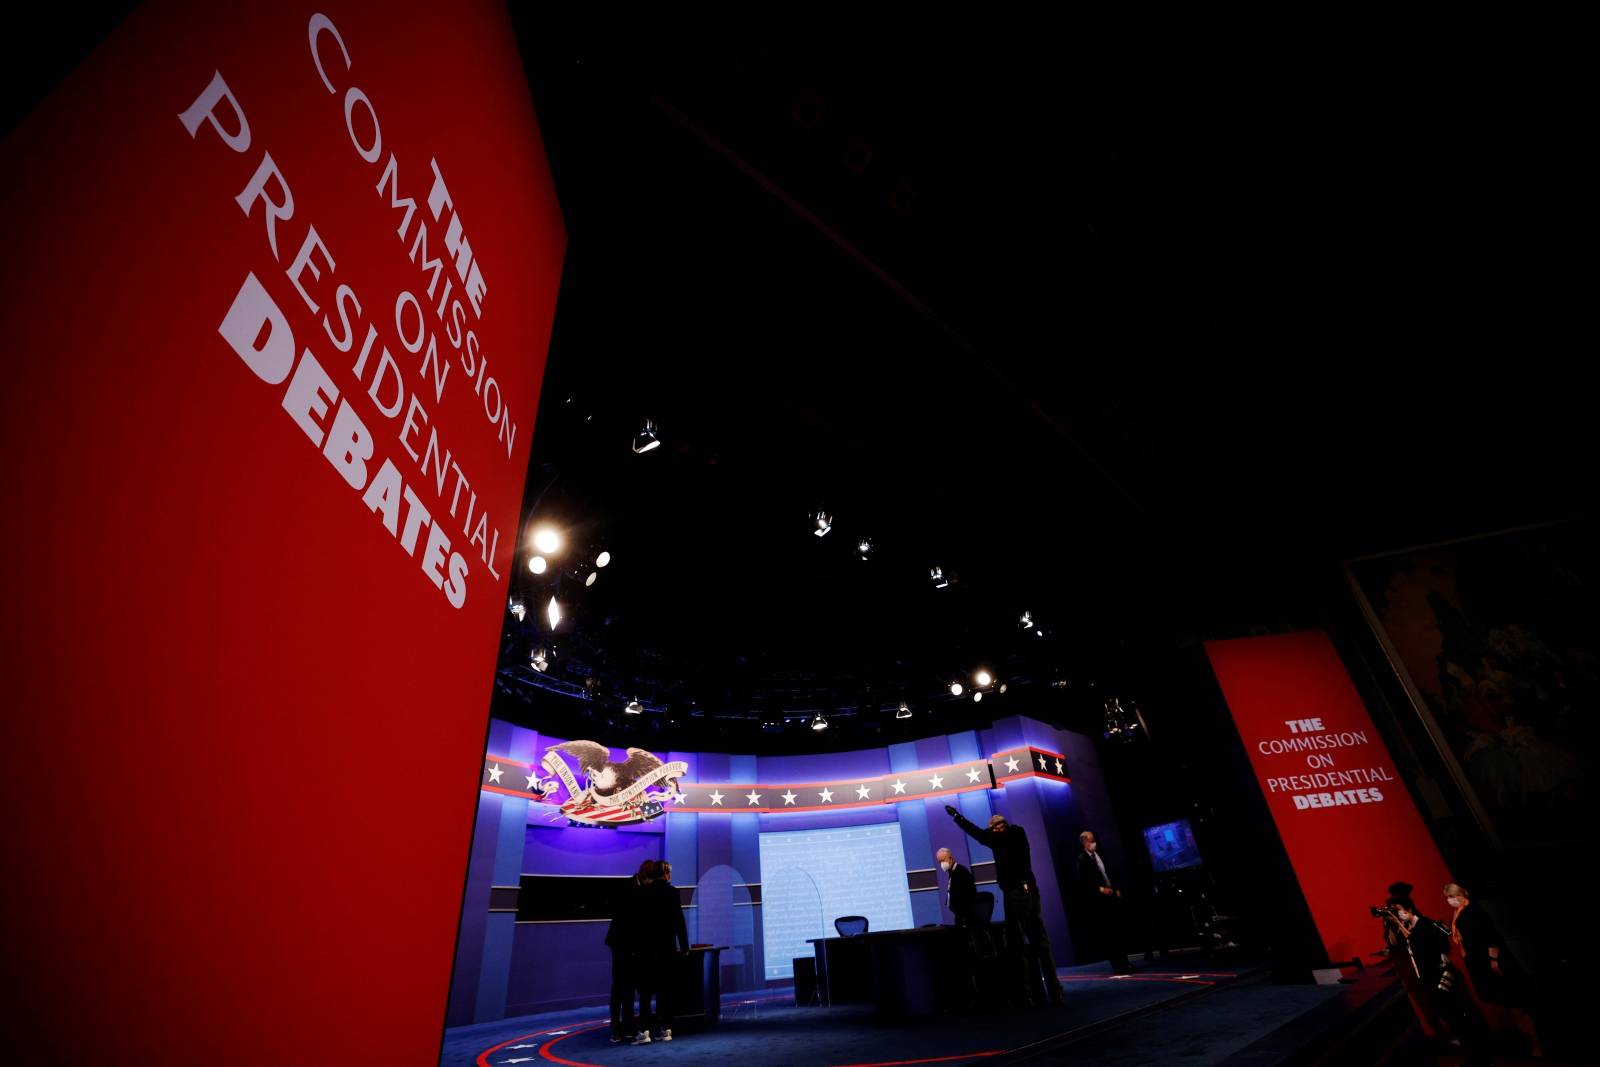 The stage is set for the vice presidential debate in Salt Lake City